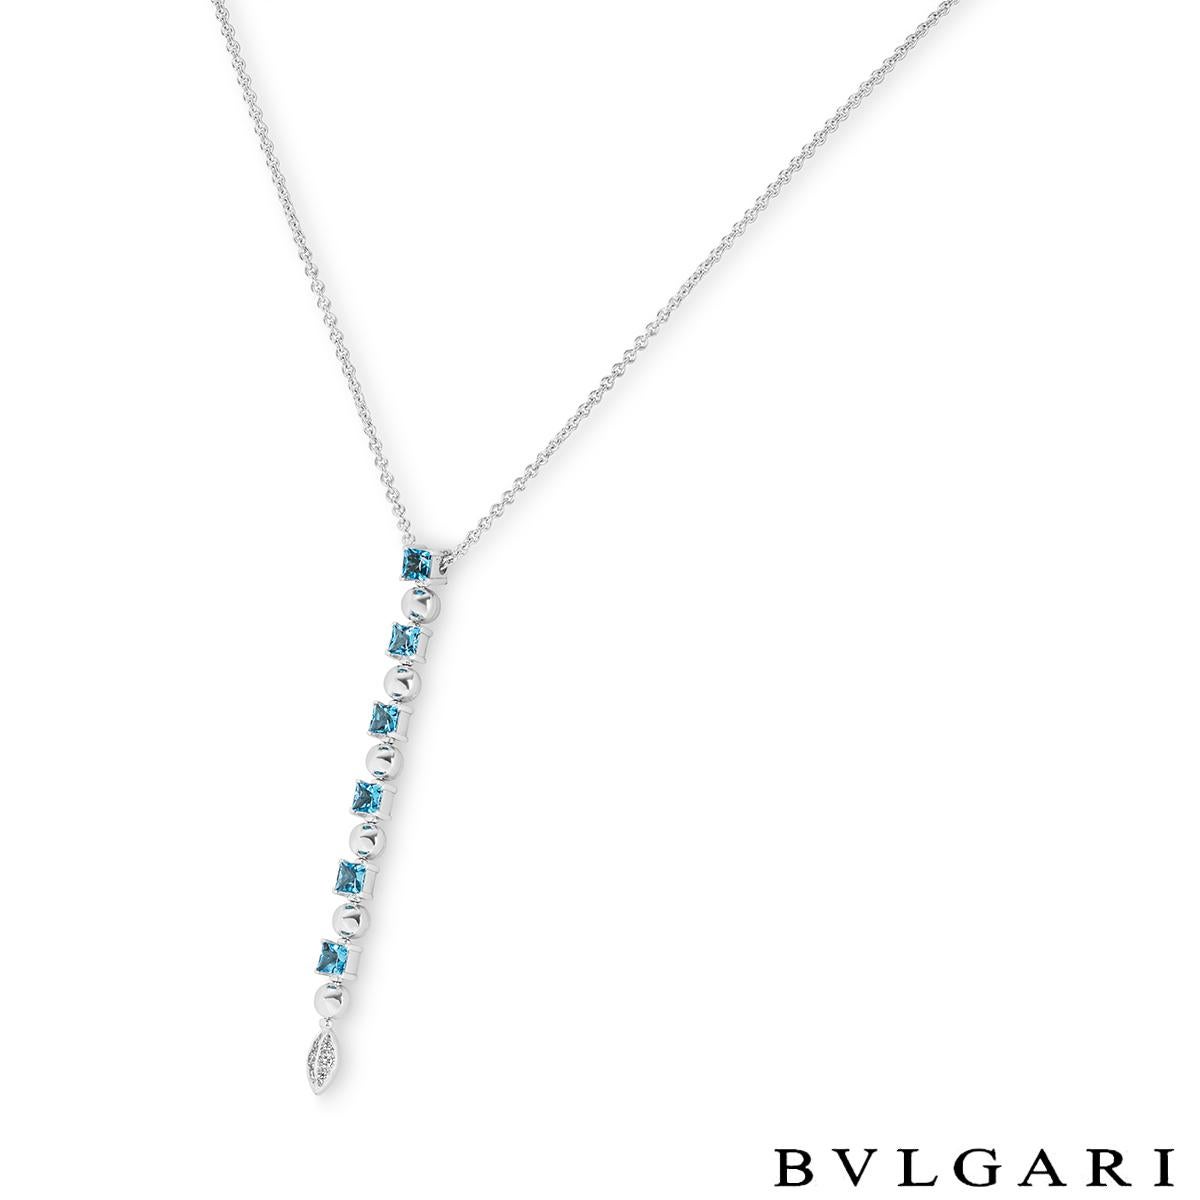 An elegant 18k white gold aquamarine and diamond drop pendant by Bvlgari from the Lucea collection. The pendant is composed of 6 square sugarloaf cut aquamarines alternating with 6 spherical motifs that lead down to a diamond set marquise motif. The